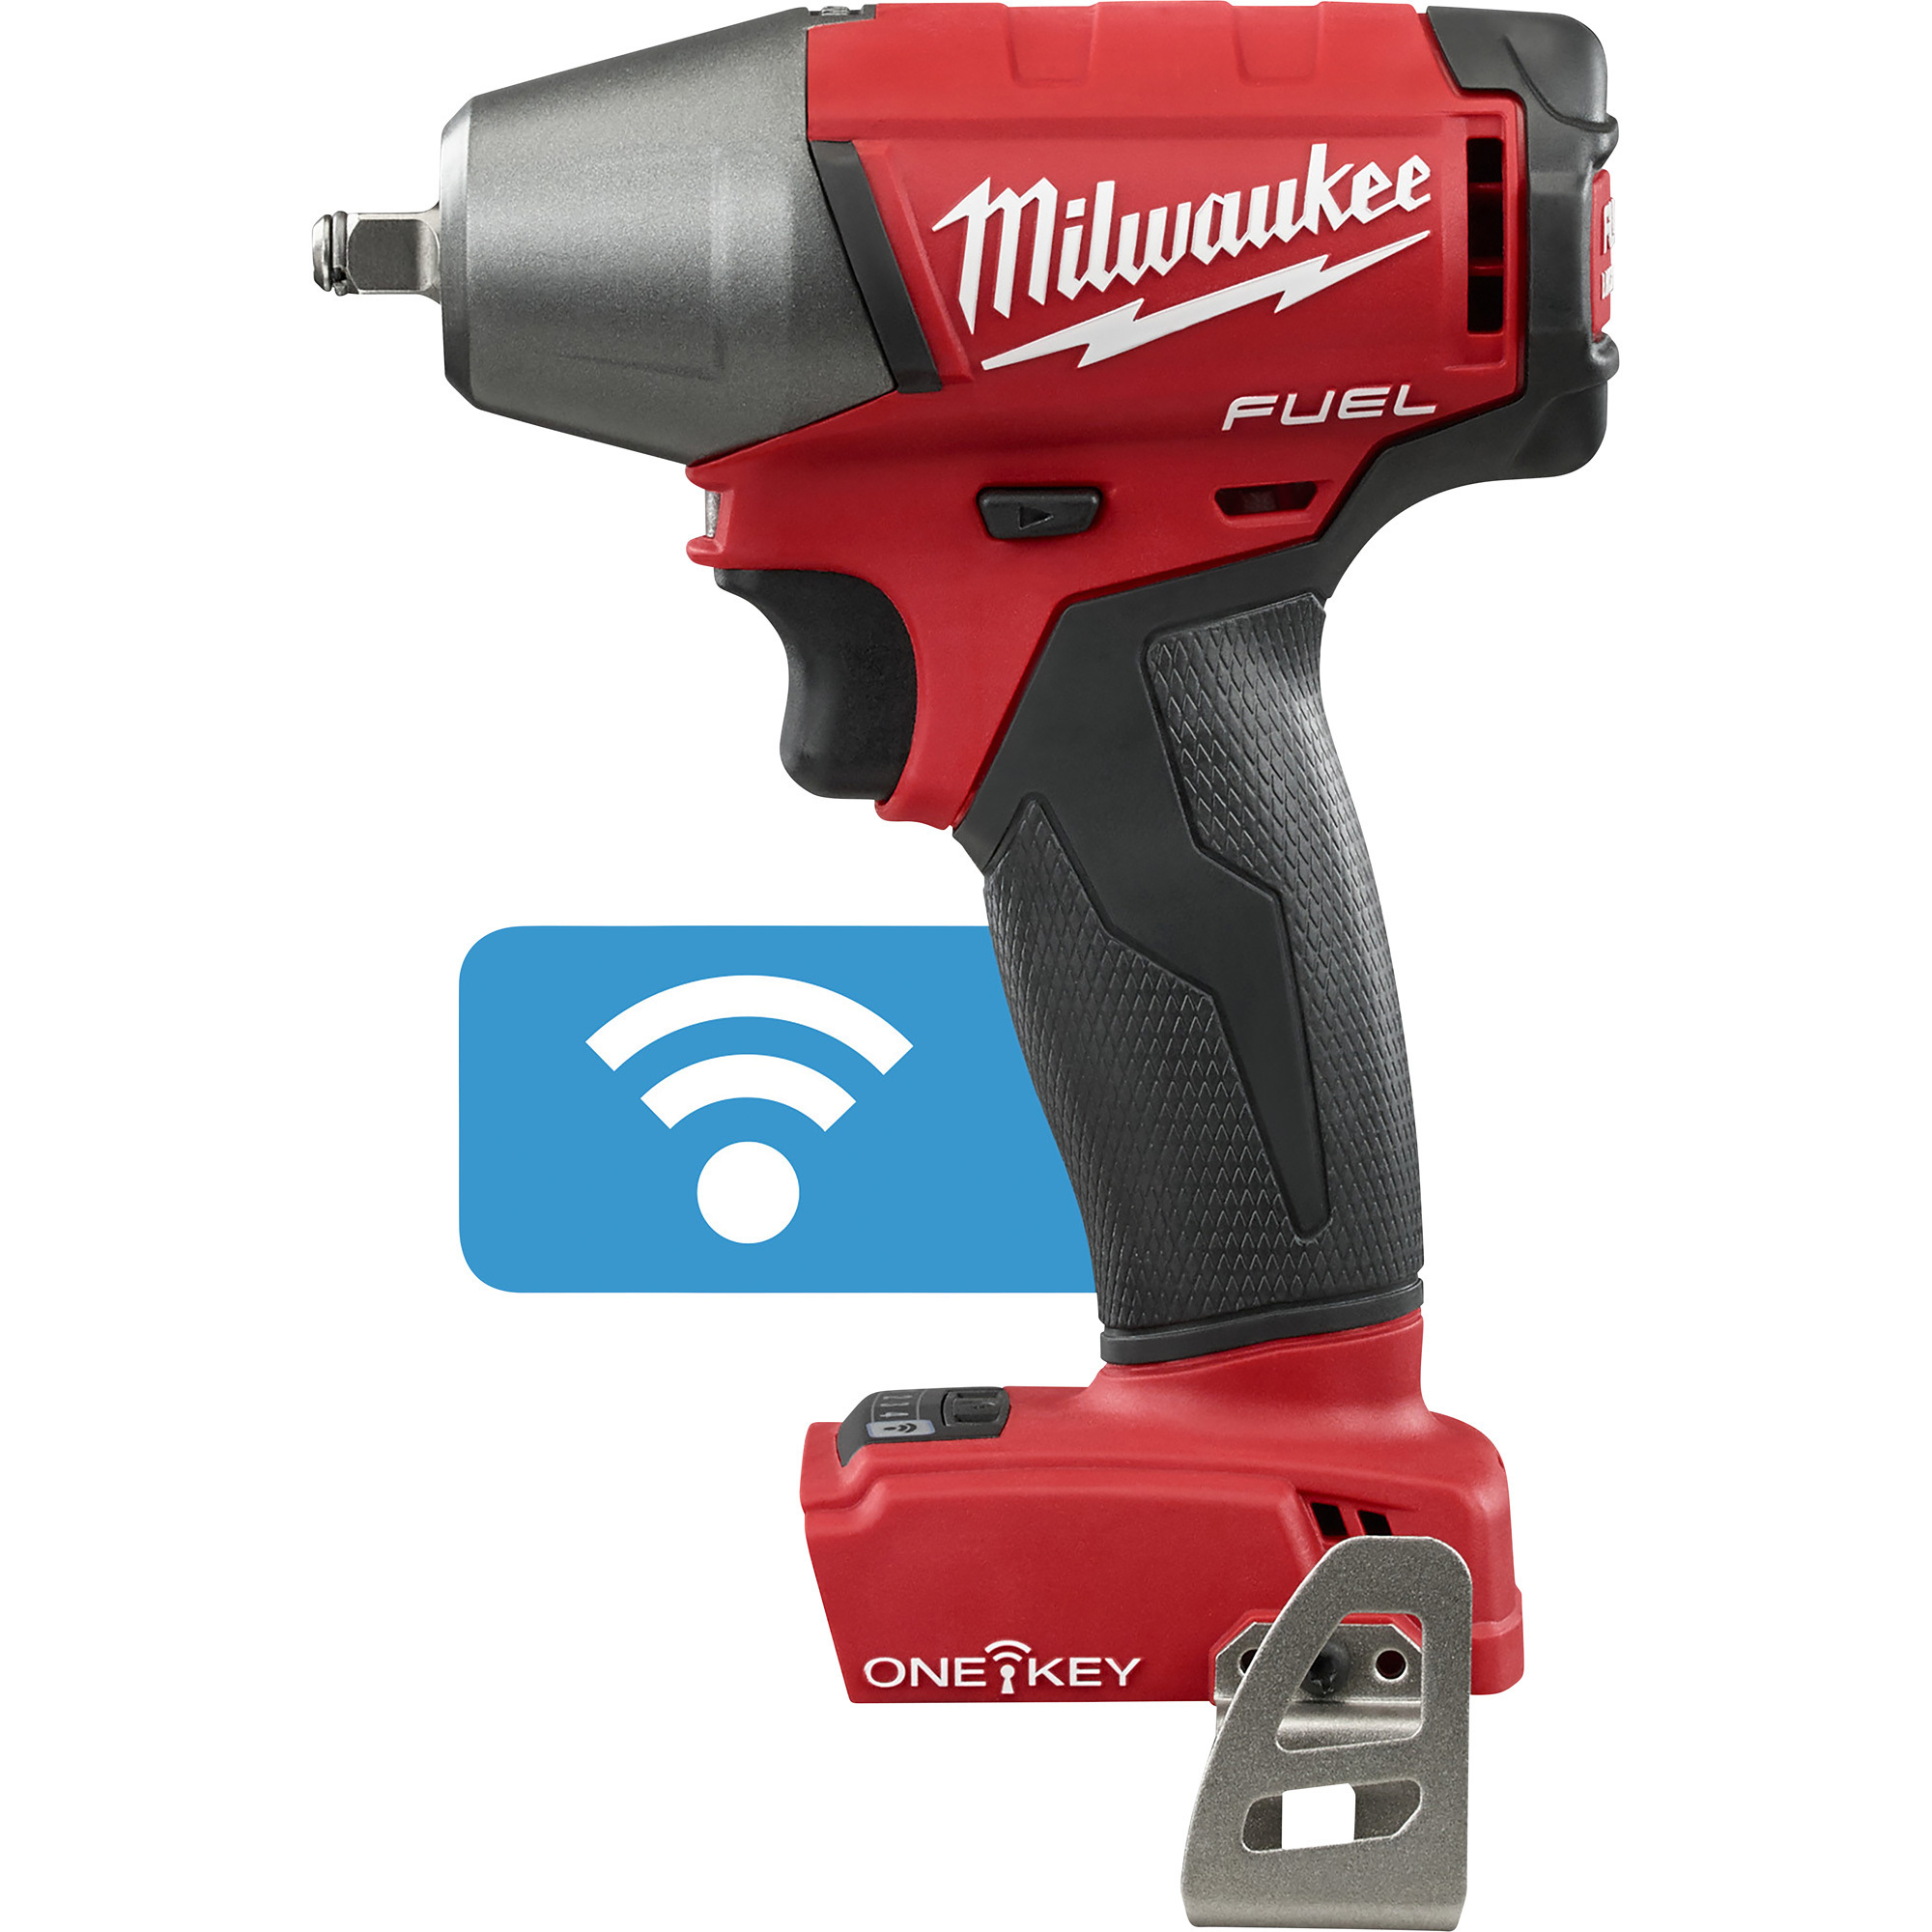 Milwaukee M18 FUEL Cordless Impact Wrench with ONE-KEY, Tool Only, 3/8Inch Drive with Friction Ring, 210 Ft./Lbs. Torque, Model 2758-20